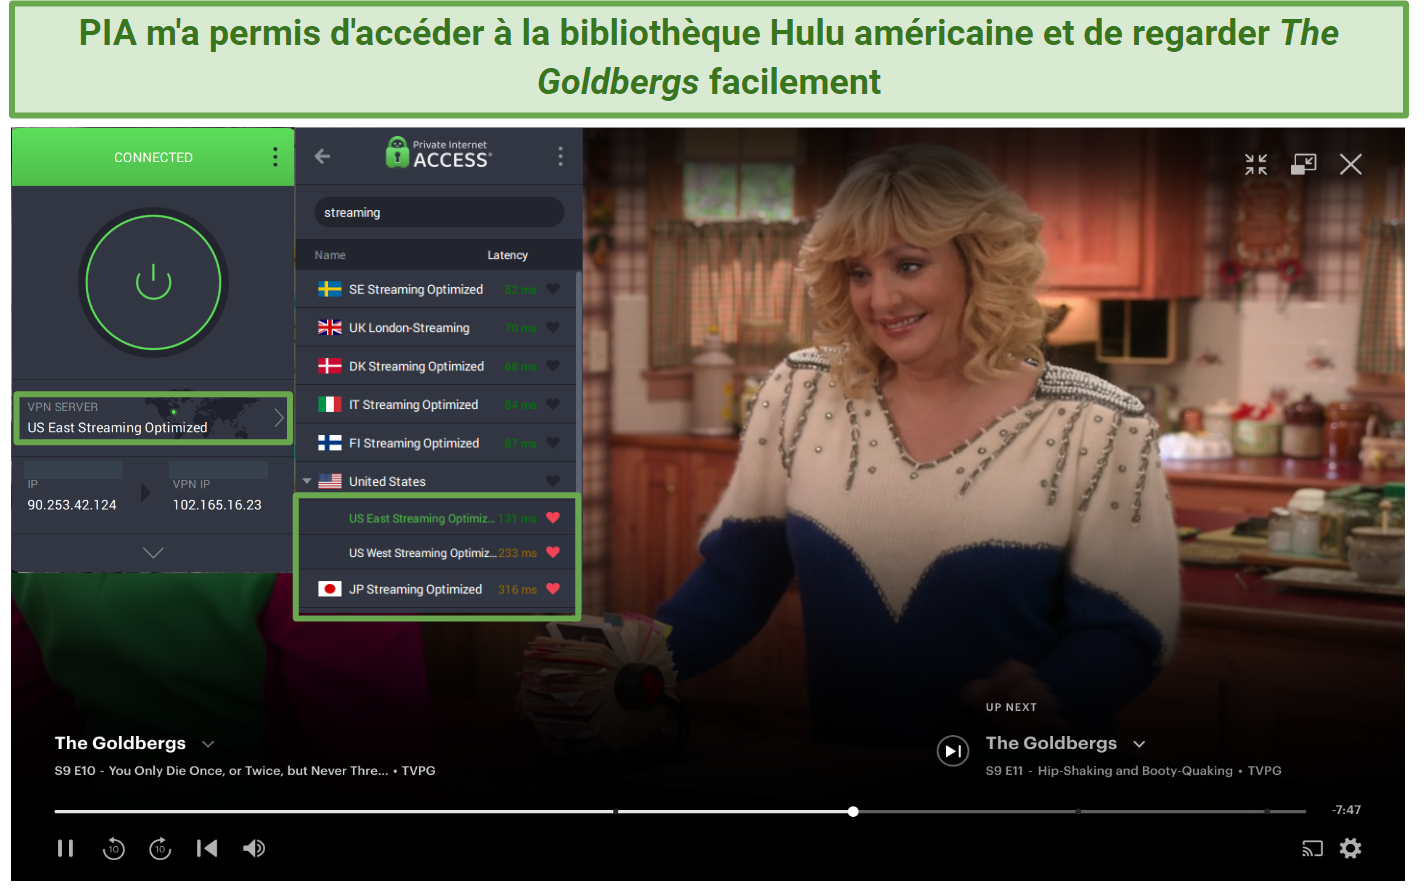 PIA's streaming servers unblocking the US Hulu library and streaming The Goldbergs